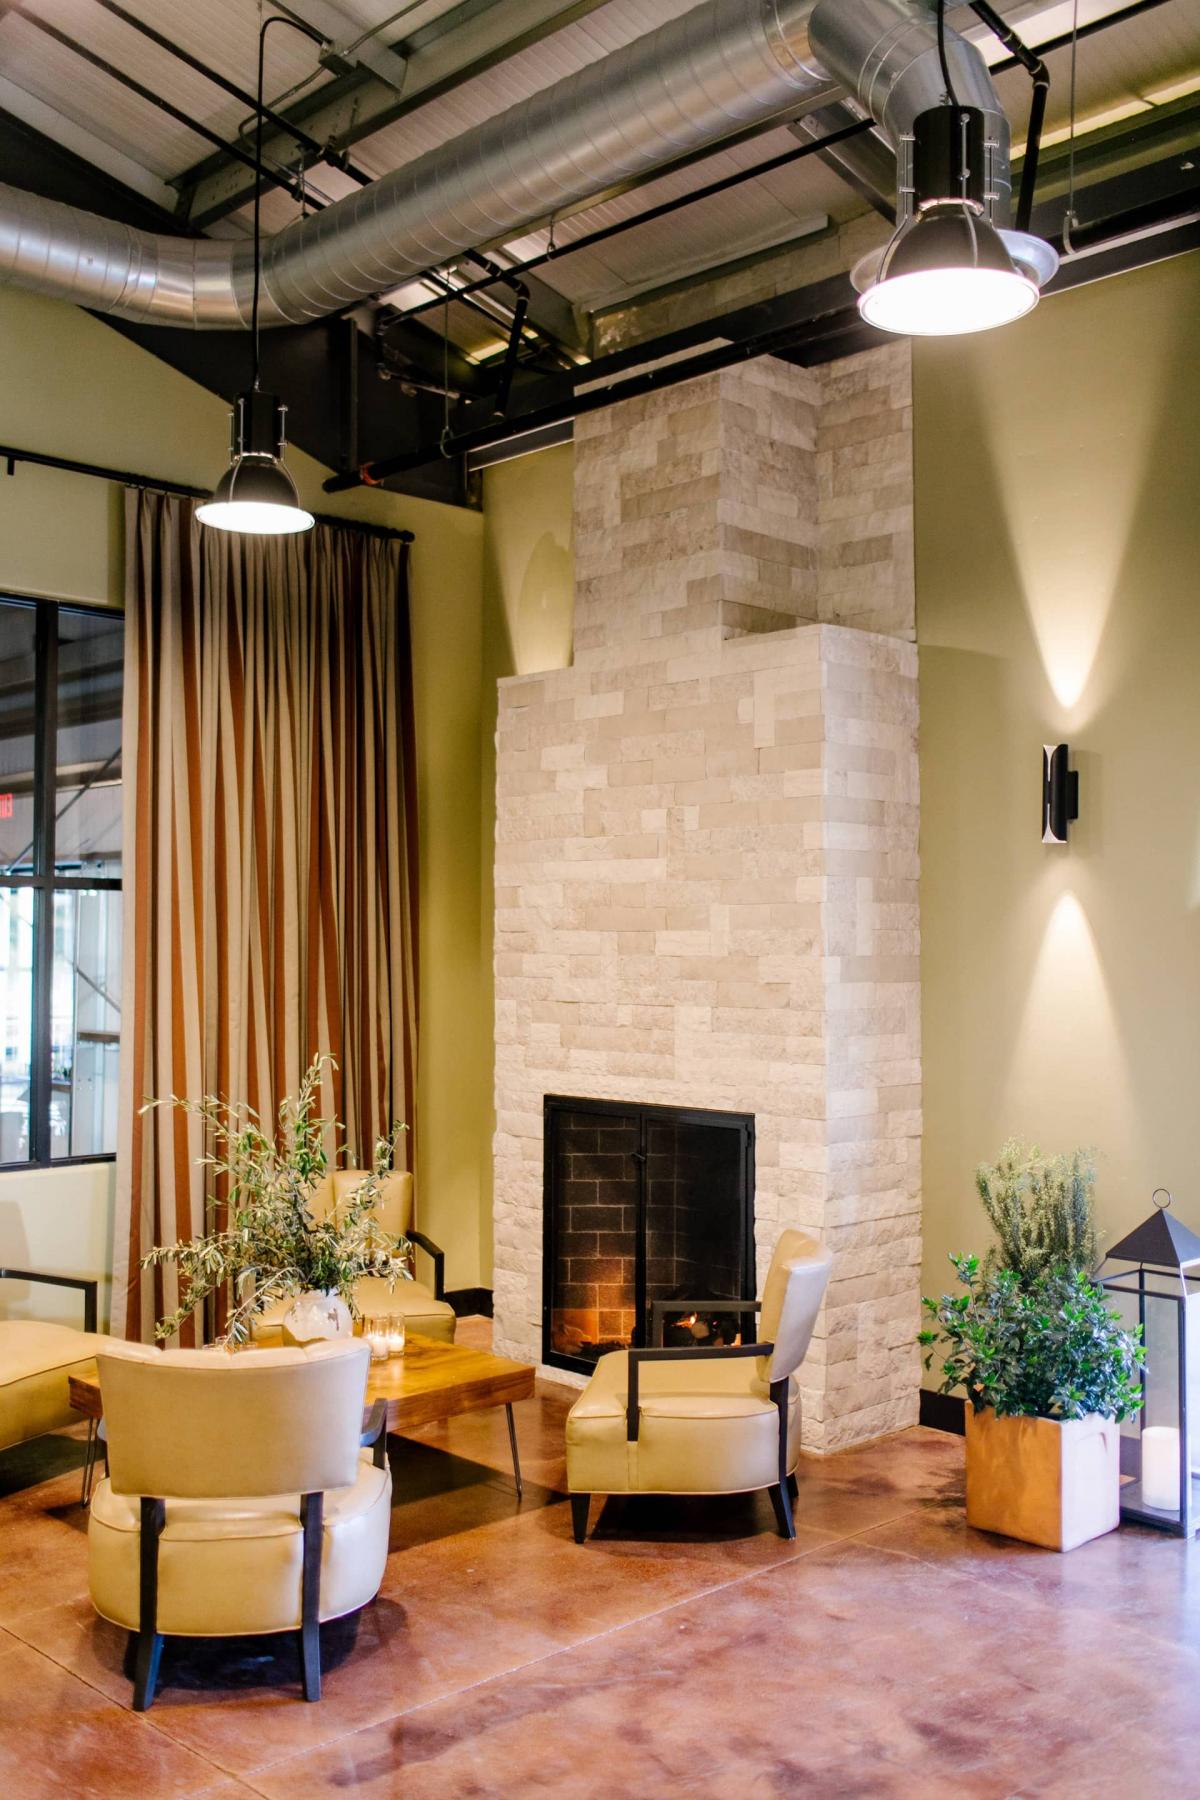 Petros Winery Reception Area with Chairs, Planters, Glass Candle Holder with Lampshades